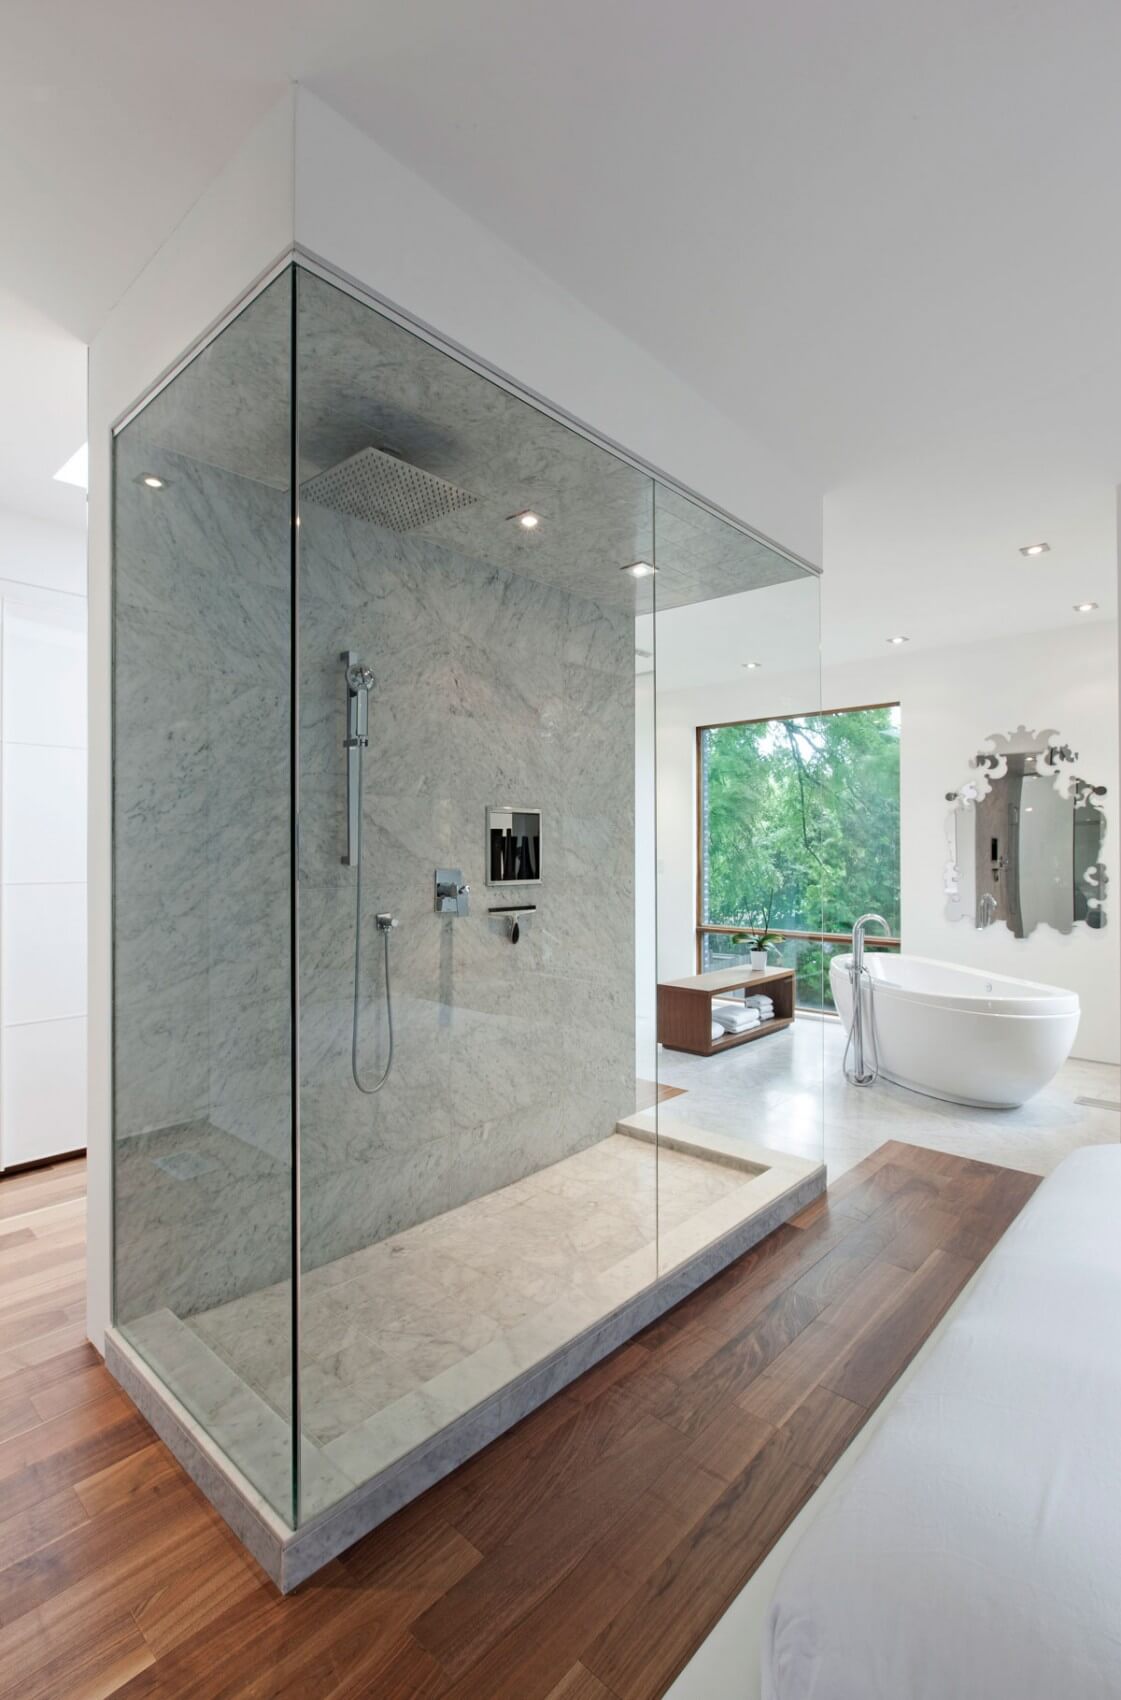 A marble shower surrounded by wooden floor (1)